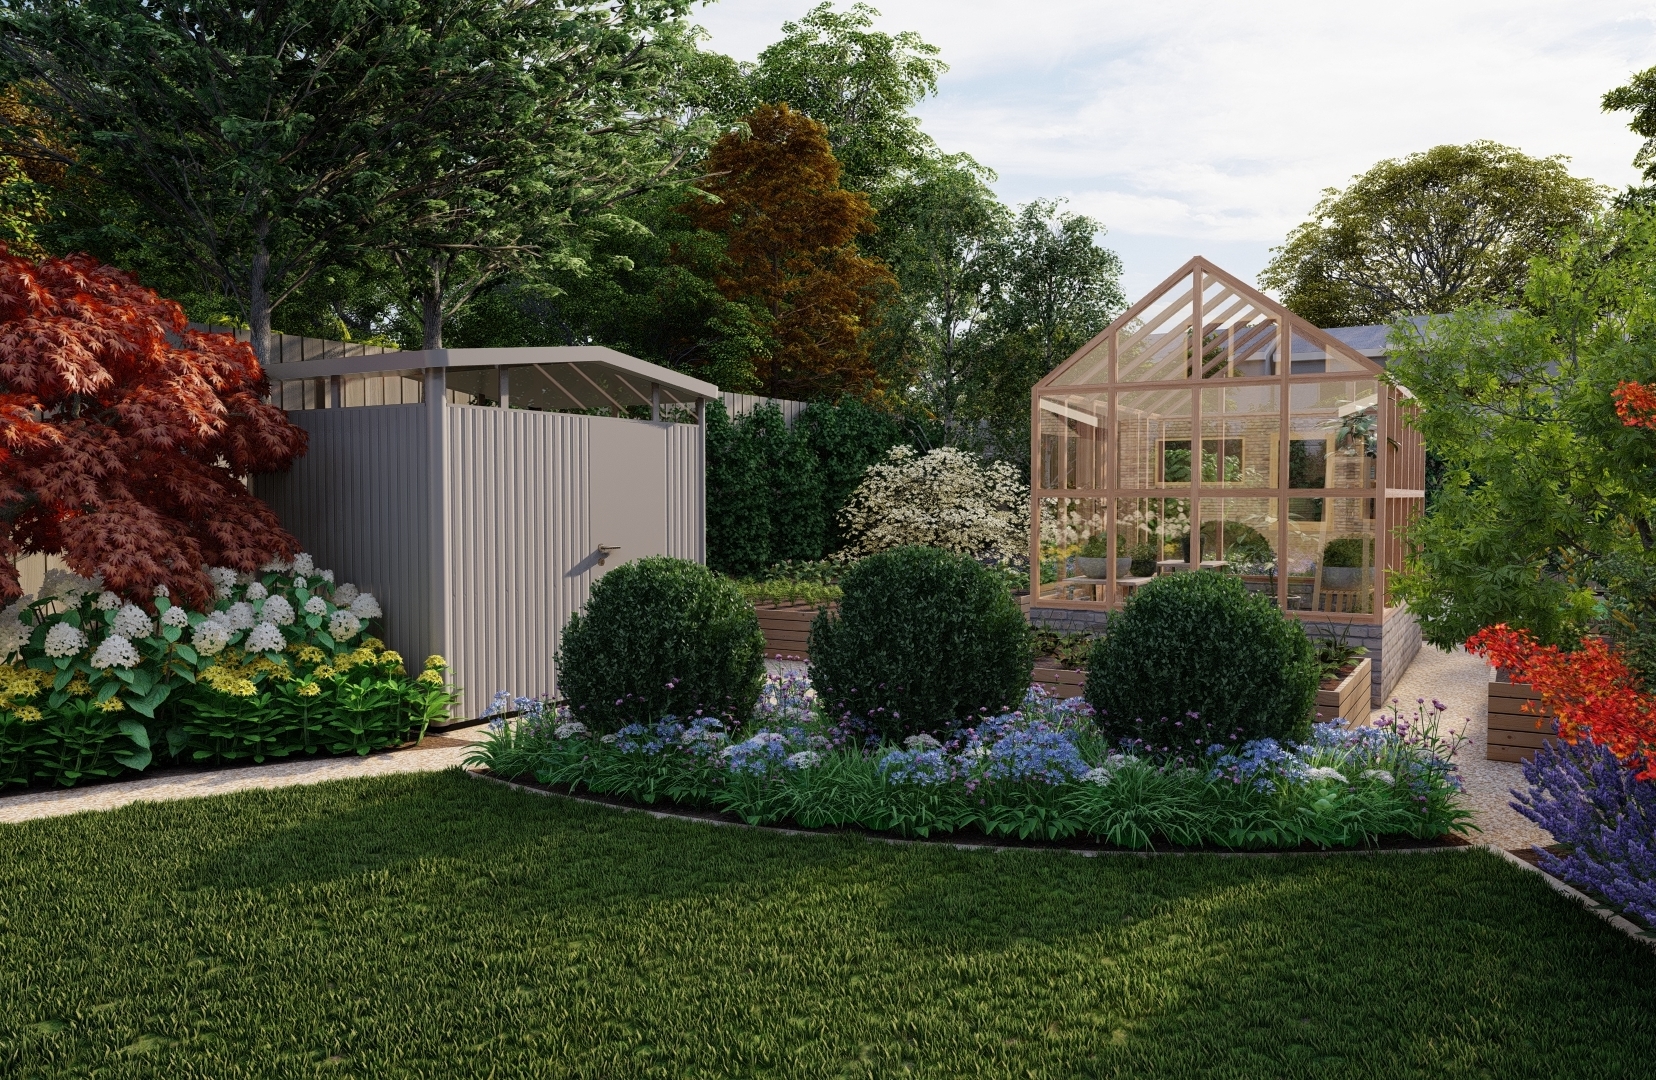 Design Visuals for a large Family Garden in Dundrum, Dublin 18. Design features Gabriel Ash Greenhouse, Growing Beds, Biohort Garden Shed and extensive planted borders.